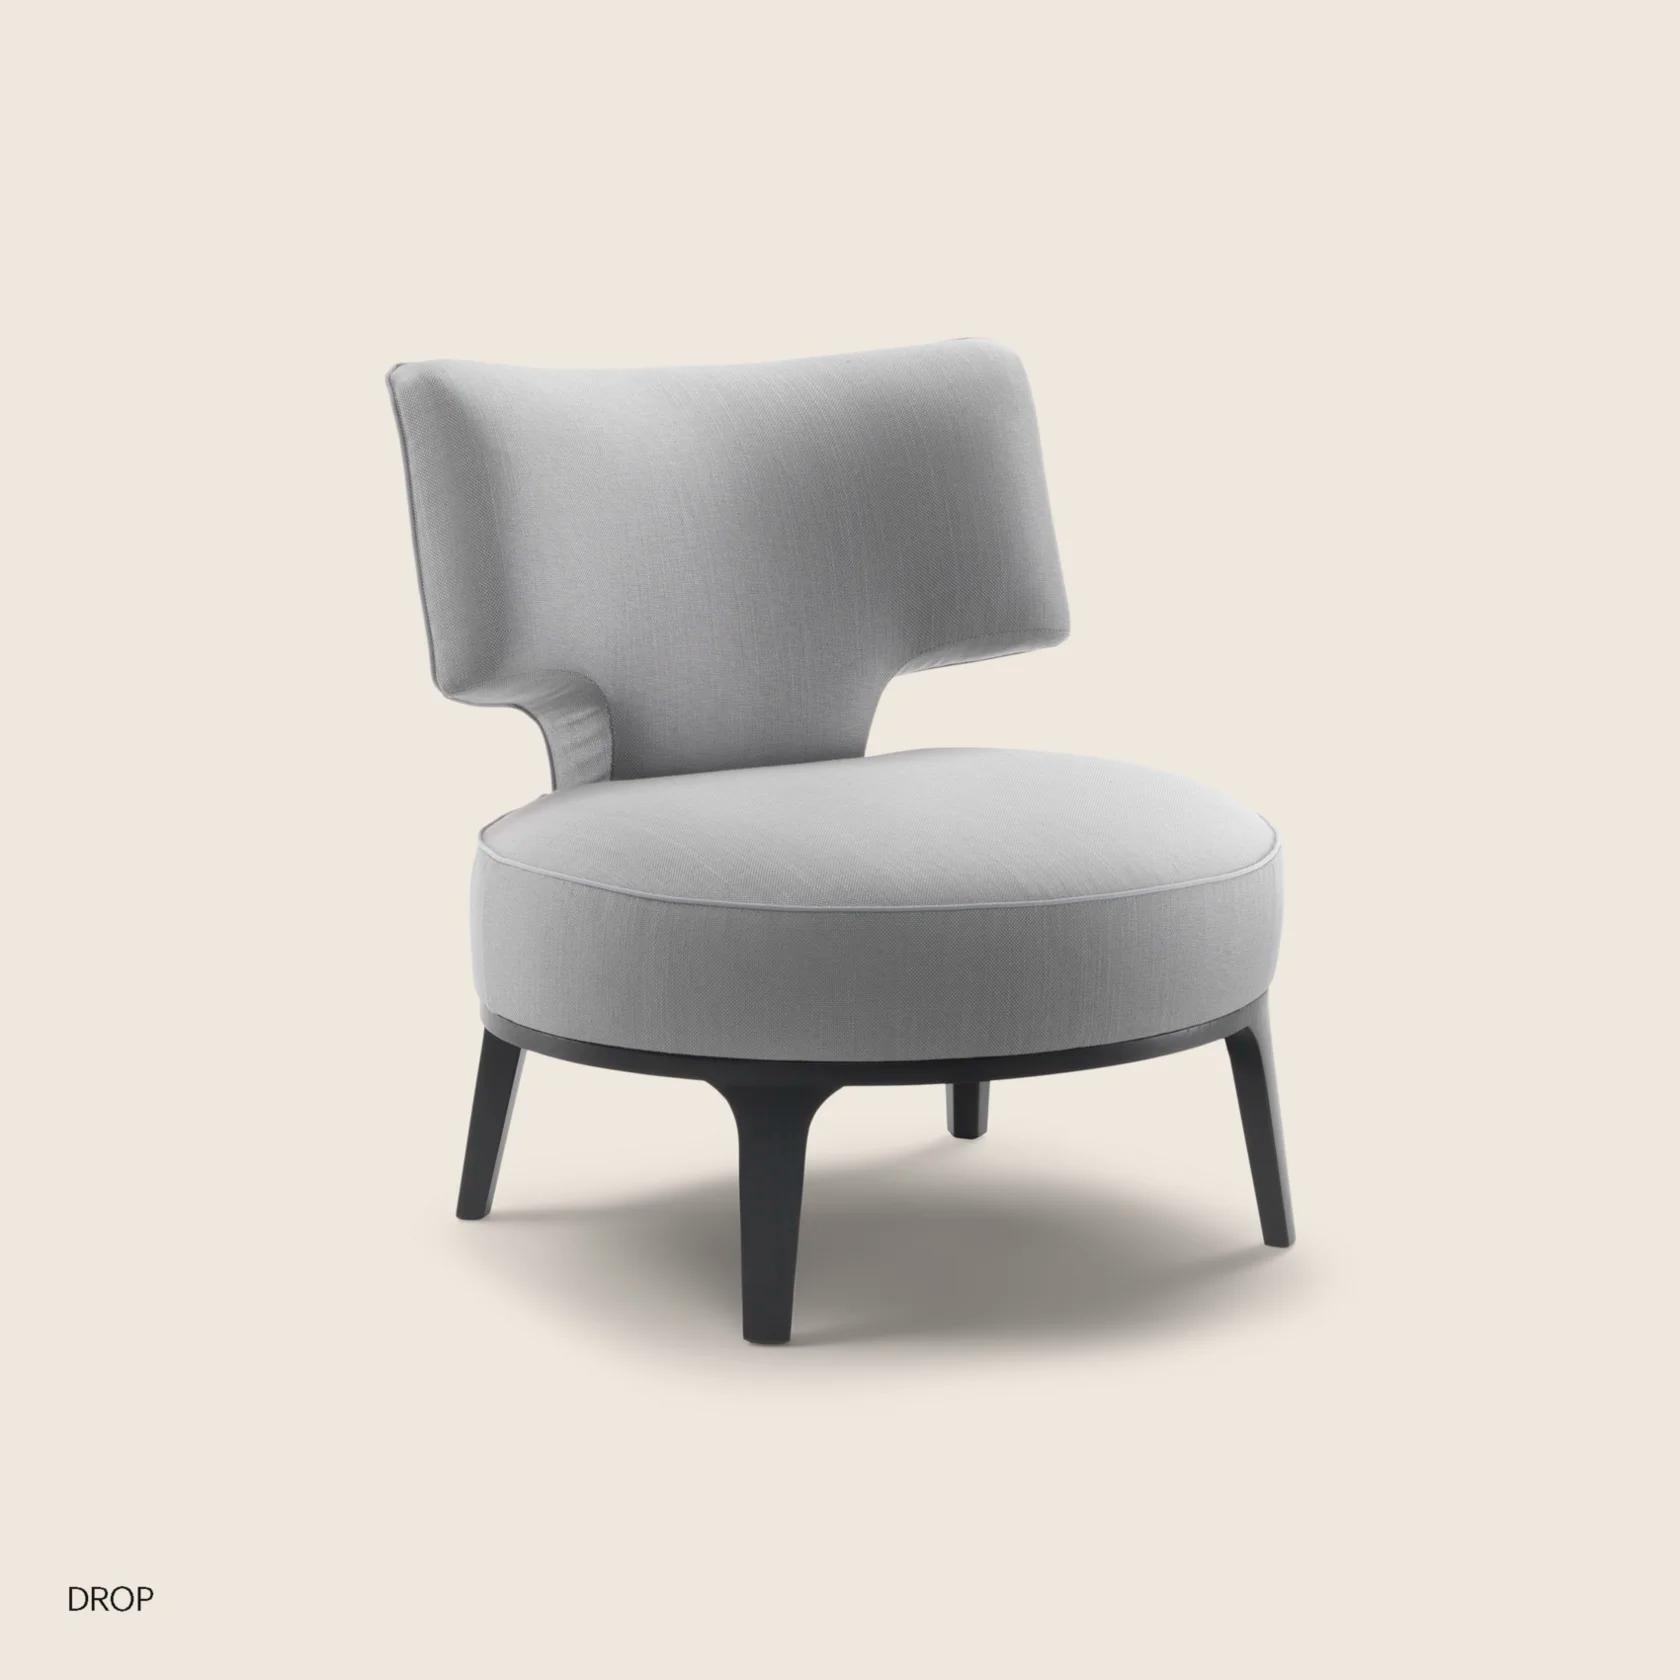 01IT11_DROP_ARMCHAIR_01_dida.png